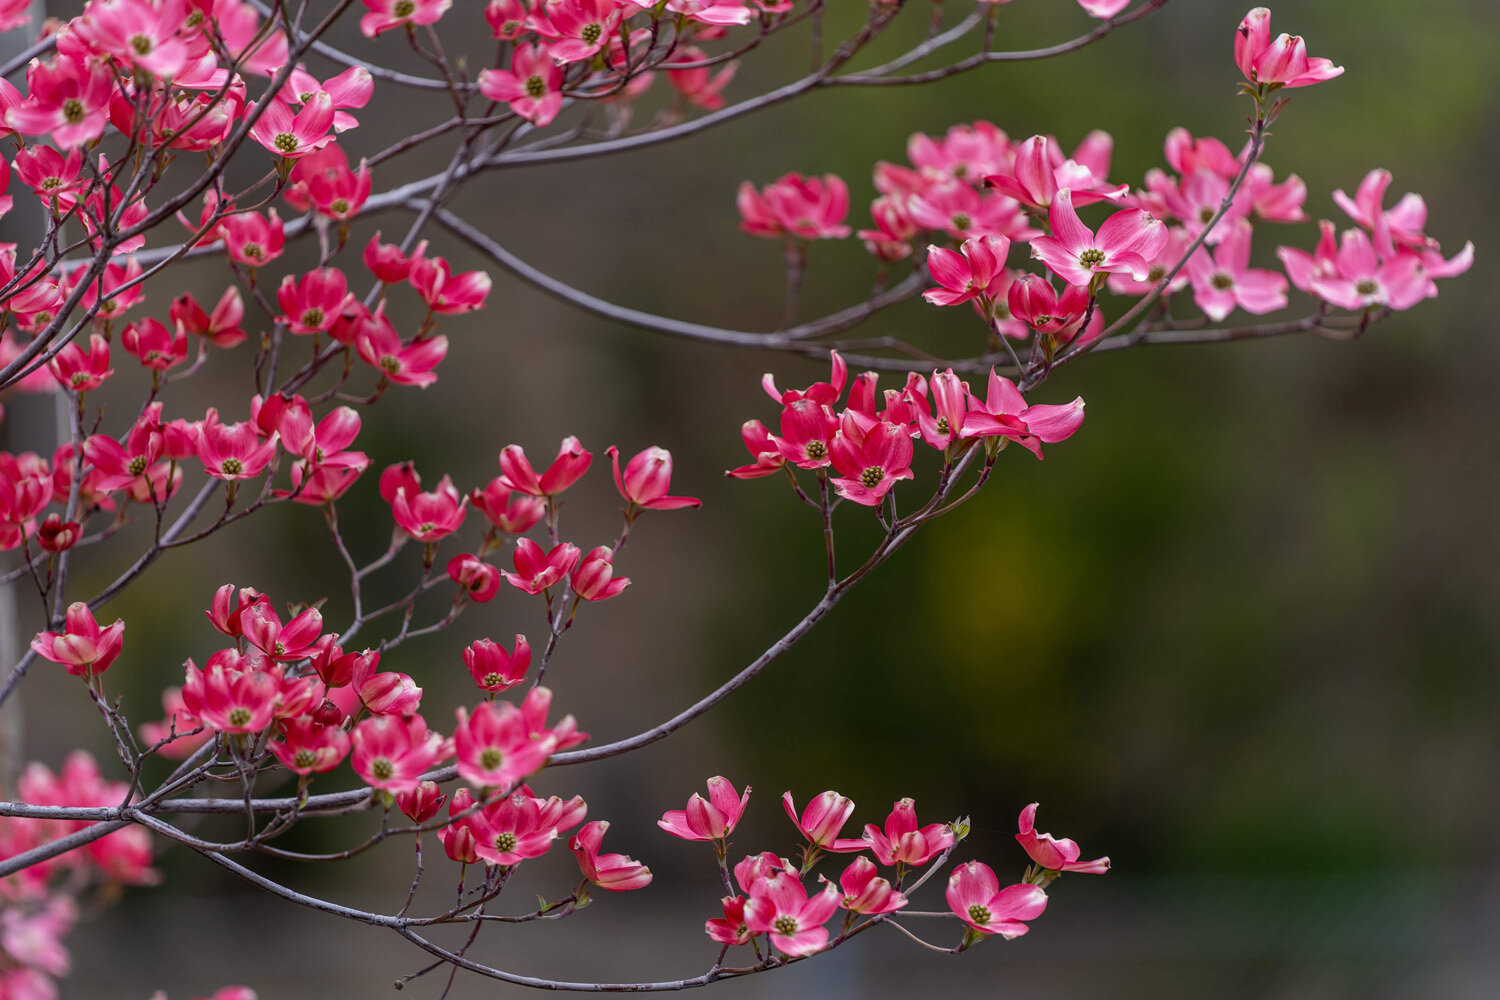 Pink Dogwood Blooming In The Forest